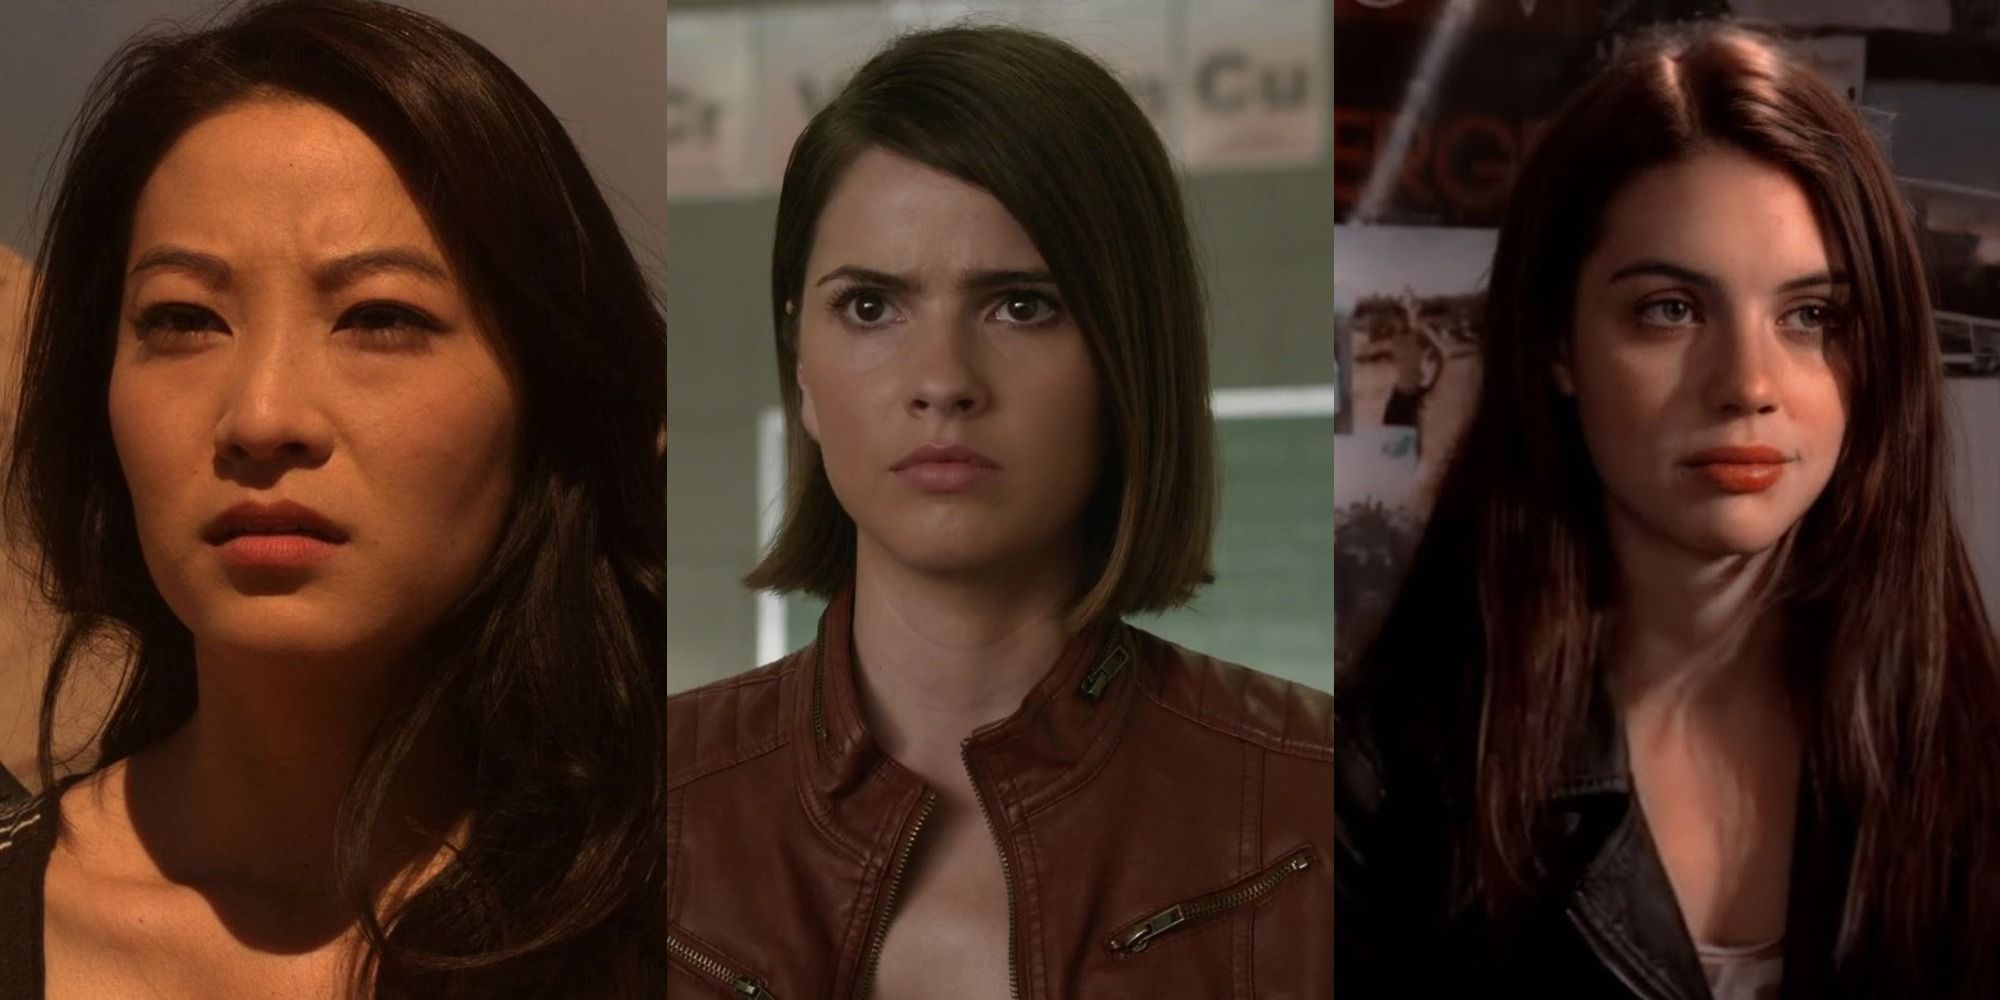 A split image of Kira Yukimura squinting in the desert, Malia frowning in a classroom, and Cora Hale in Stiles' bedroom in Teen Wolf